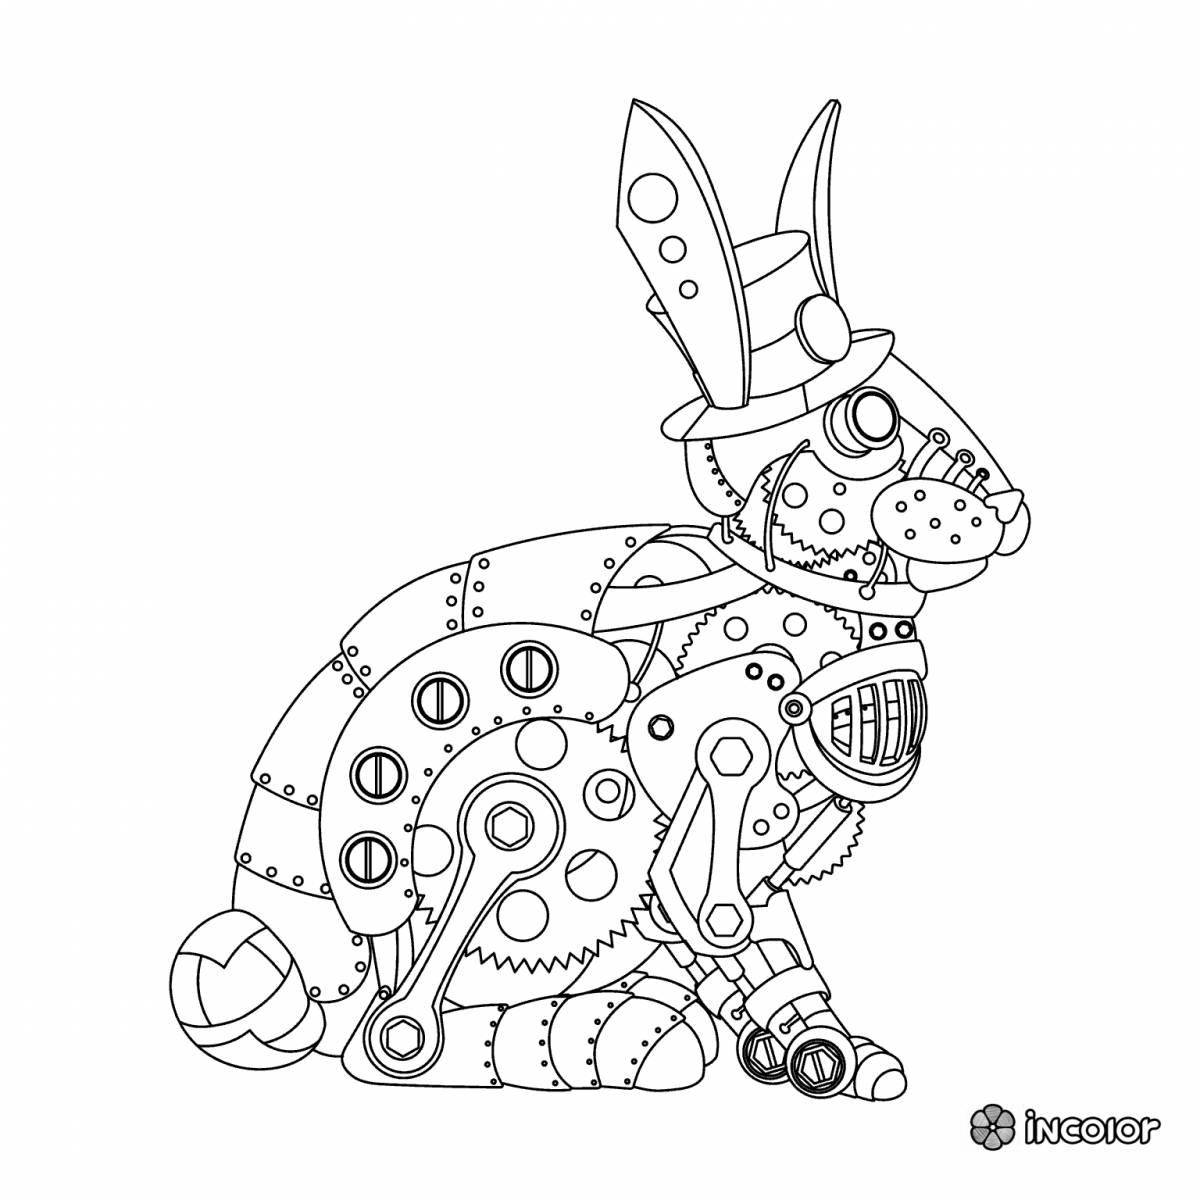 Funny robot cat coloring page